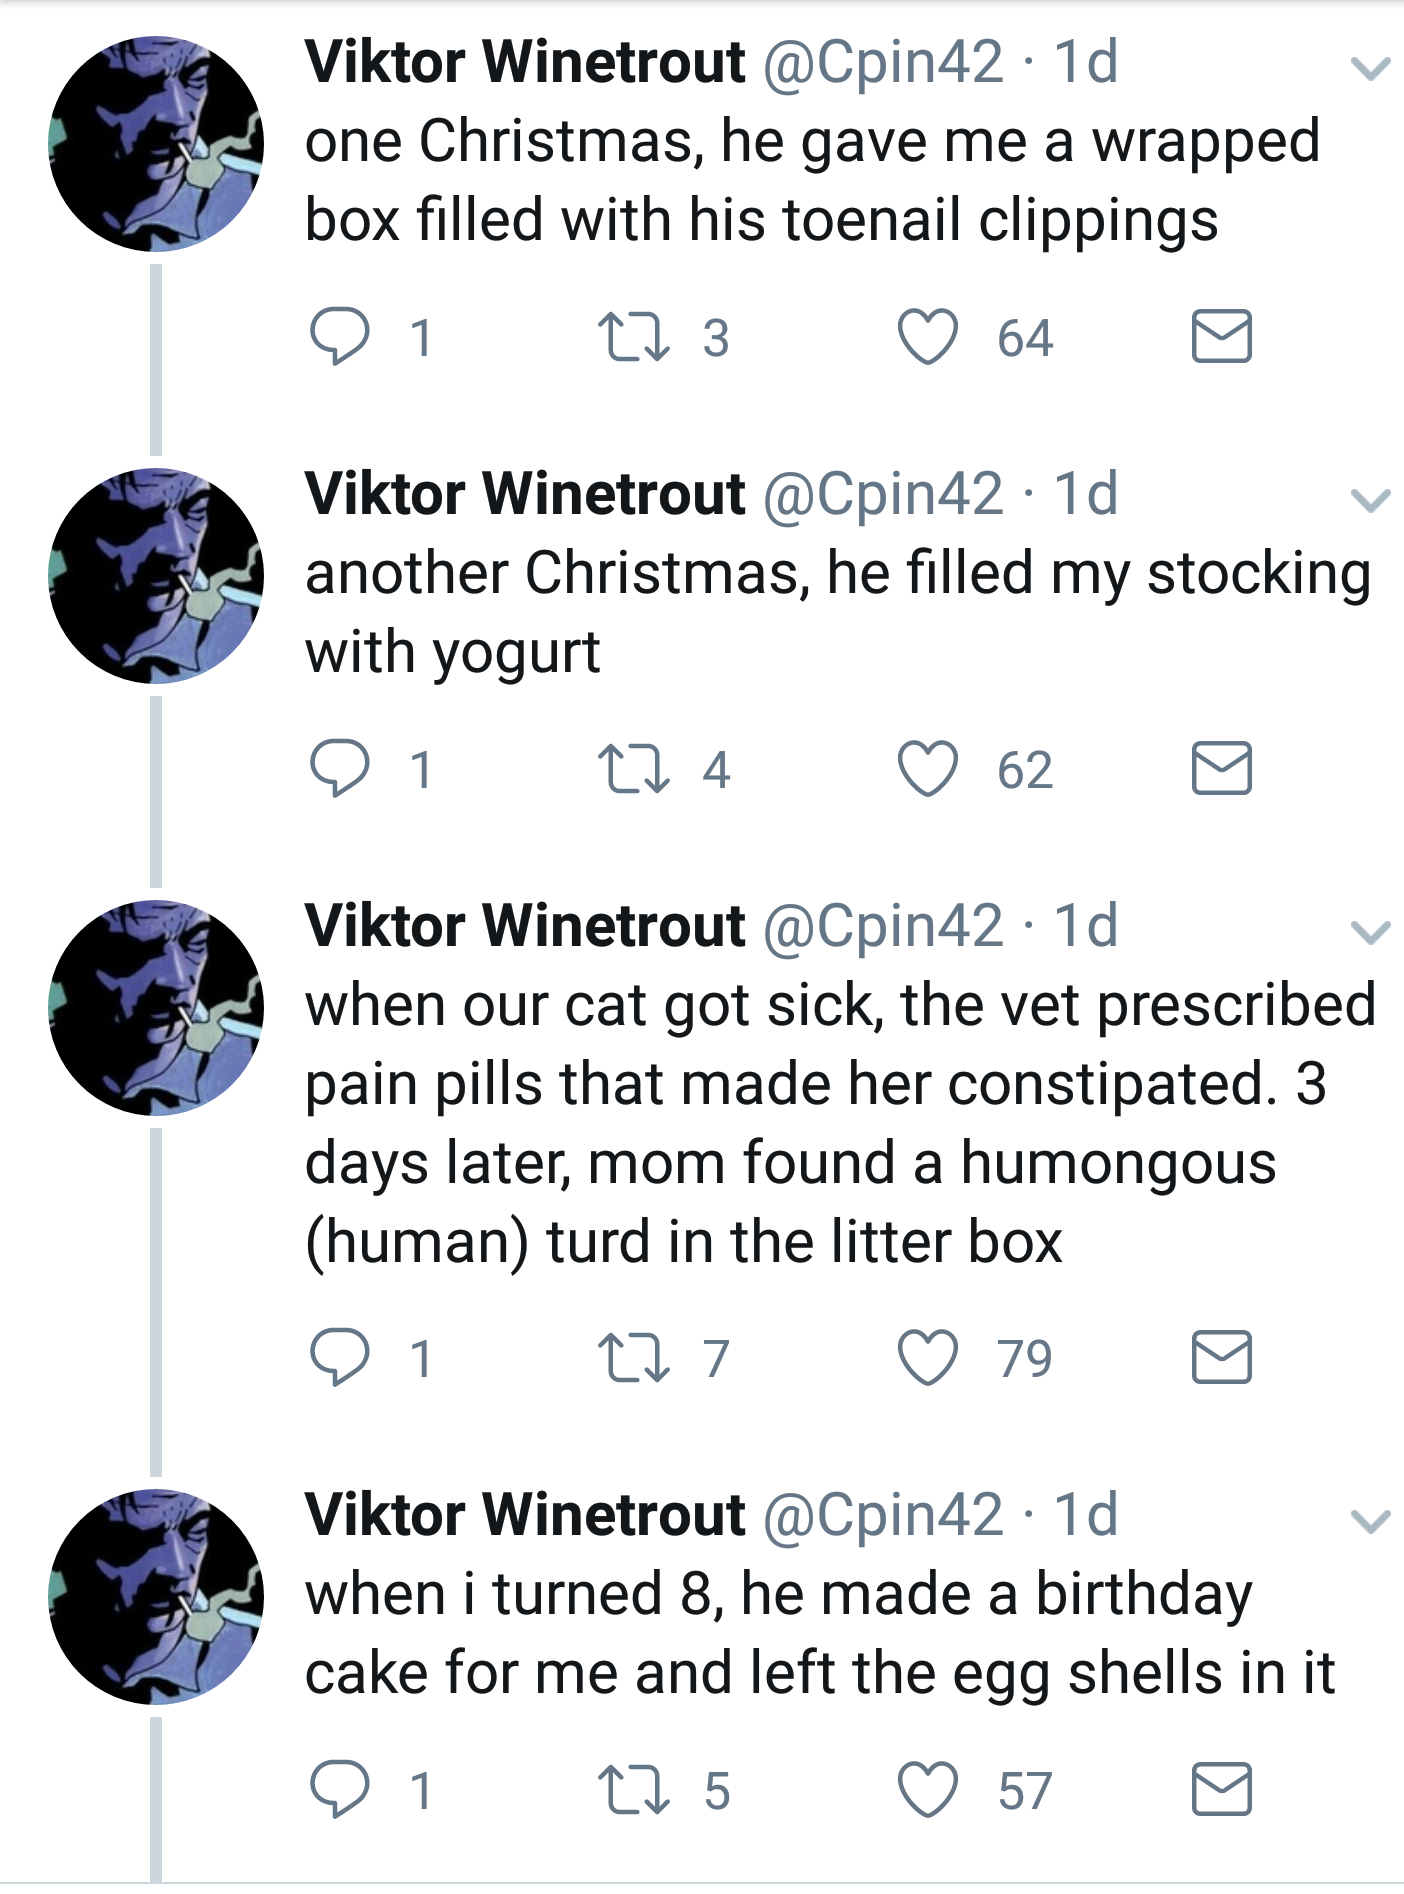 dad jokes- body jewelry - Viktor Winetrout one Christmas, he gave me a wrapped box filled with his toenail clippings Ot 273 64 g Viktor Winetrout . 1d another Christmas, he filled my stocking with yogurt 9.1 2.4 62 Viktor Winetrout @ Cpin421d when our cat